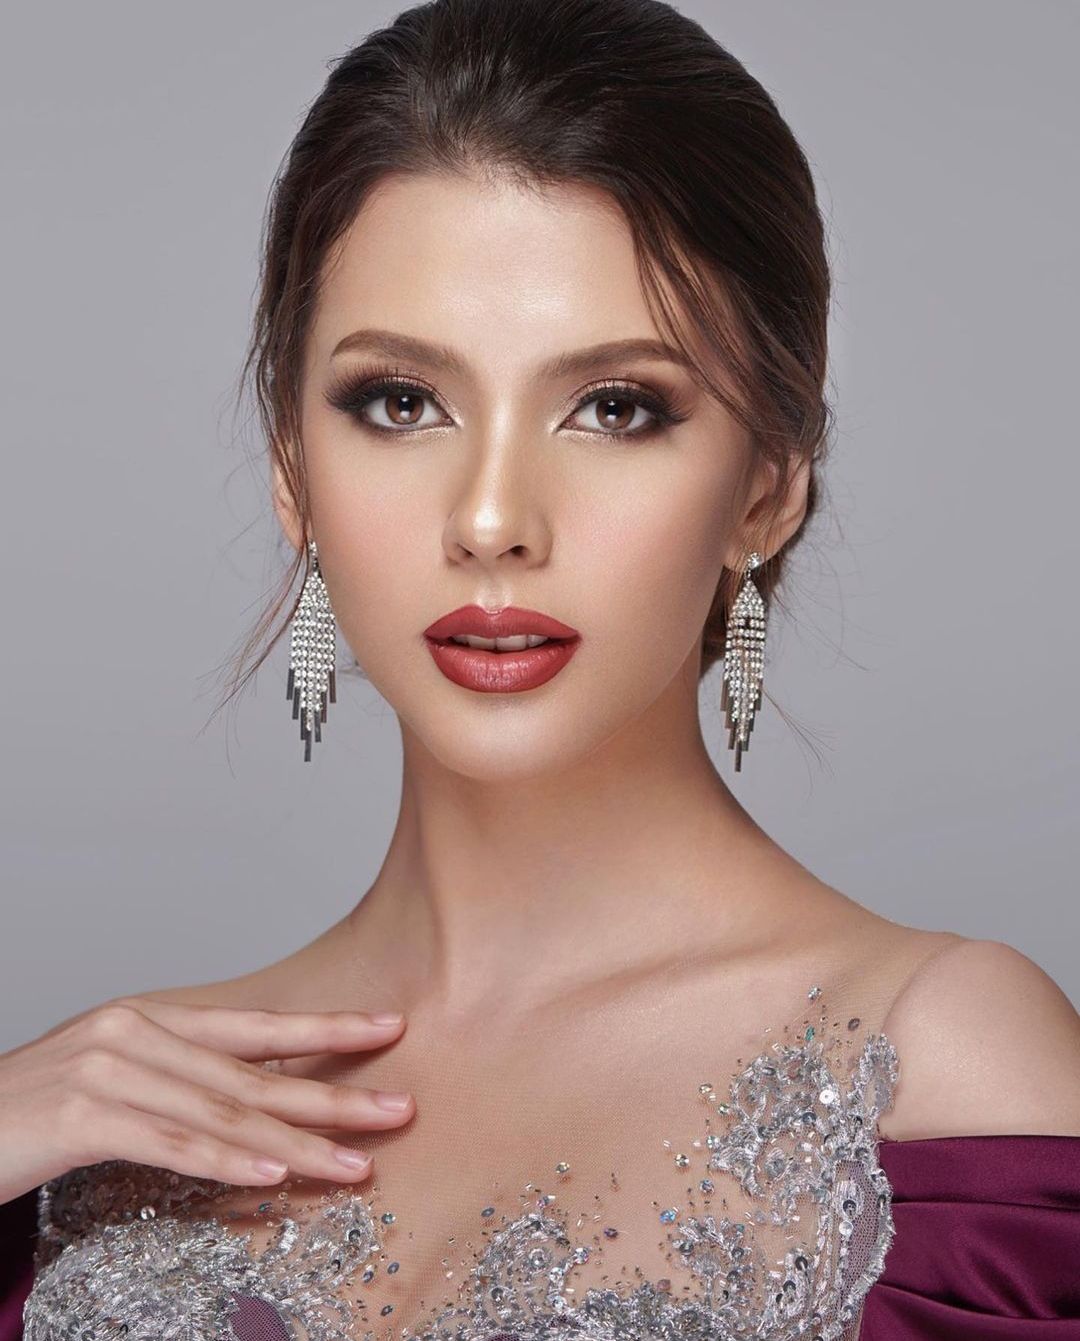 Cindy May McGuire, Runner Up 1 Puteri Indonesia 2022